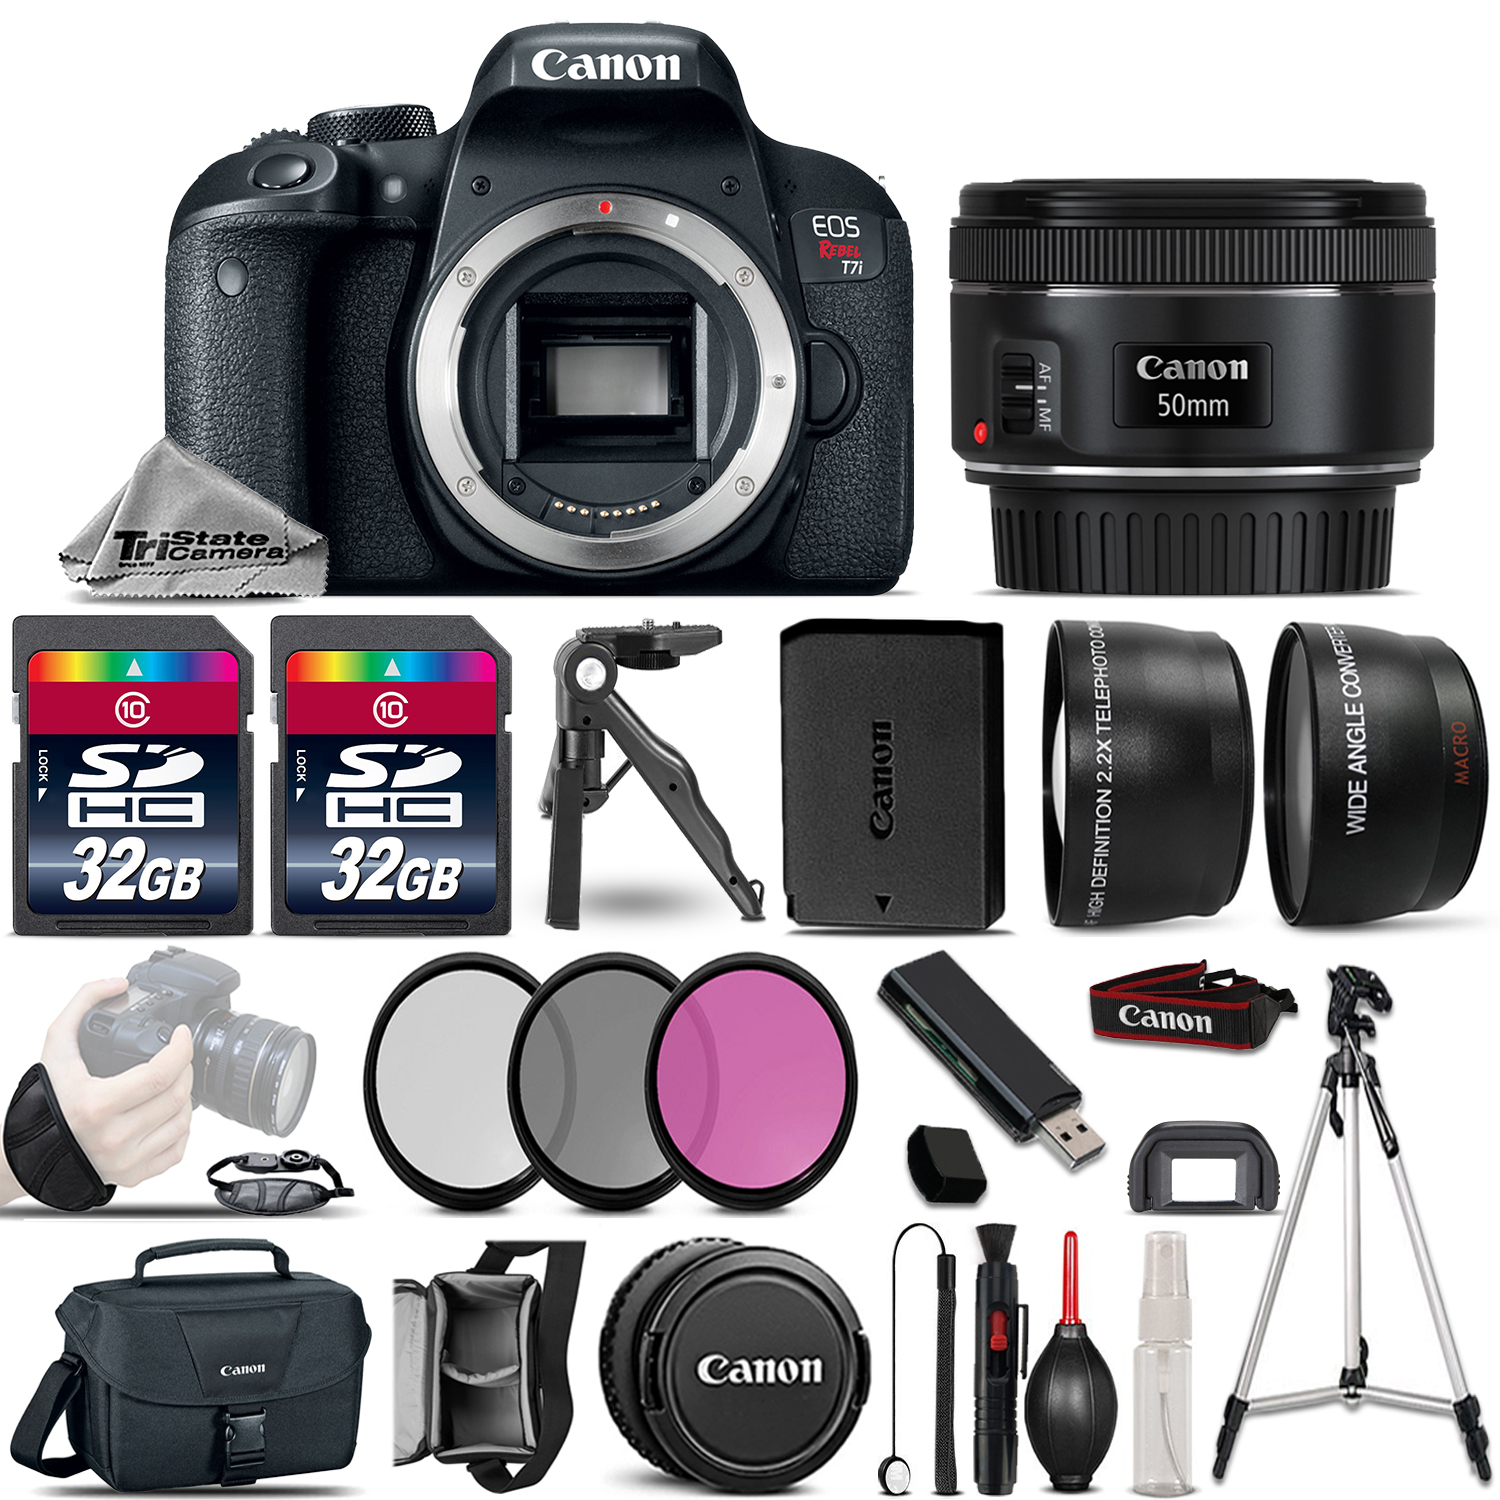 EOS Rebel T7i SLR Camera 800D + 50mm 1.8  -3 Lens Kit + 64GB + Much More! *FREE SHIPPING*